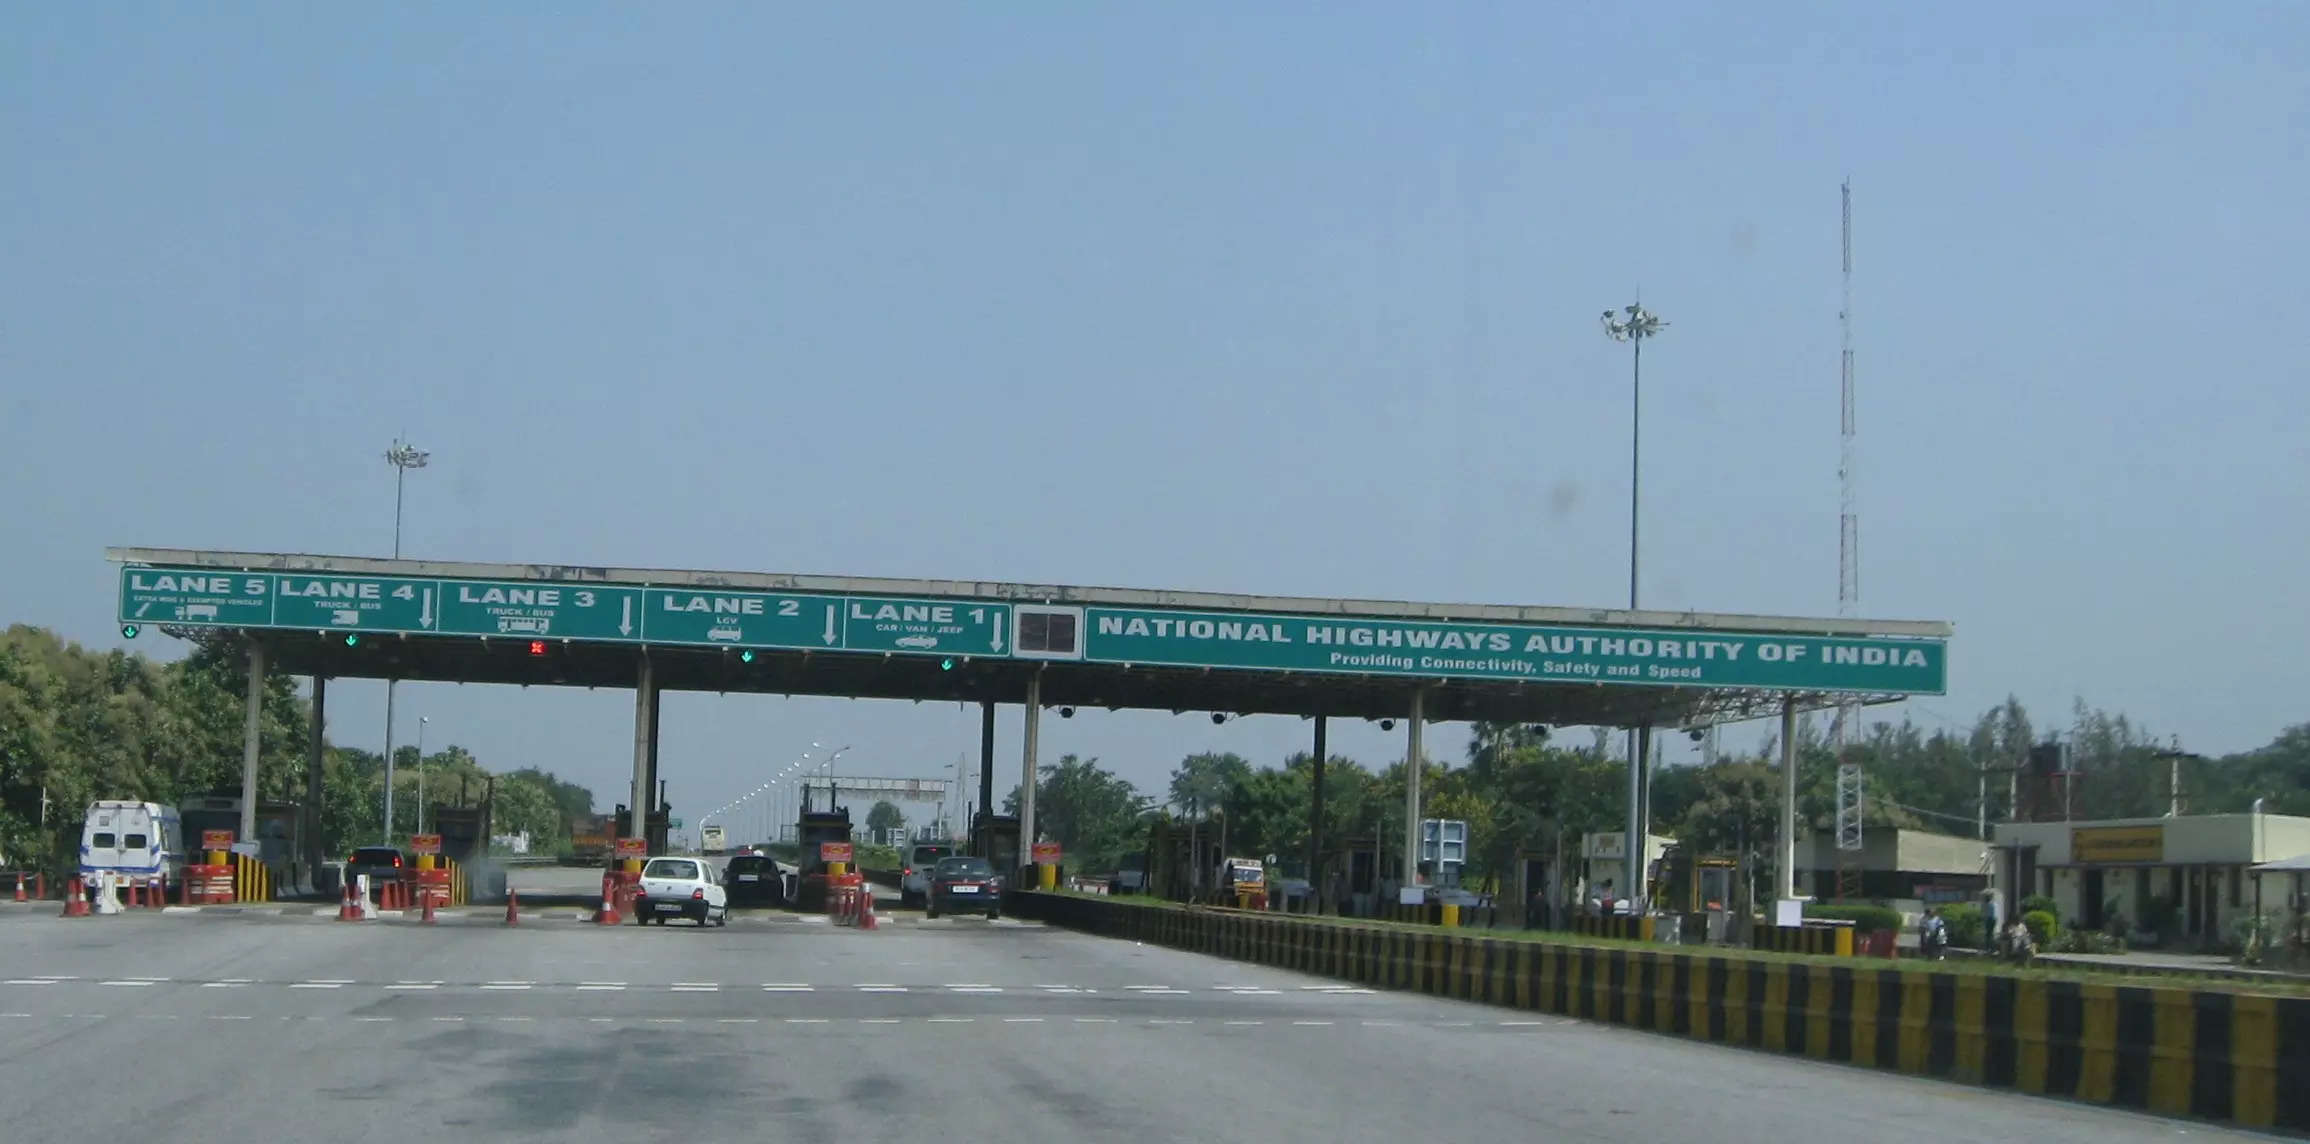 In total, 12-15 guards would be stationed at the identified spots along the 80km expressway and ensure that vehicles stick to their carriageways.